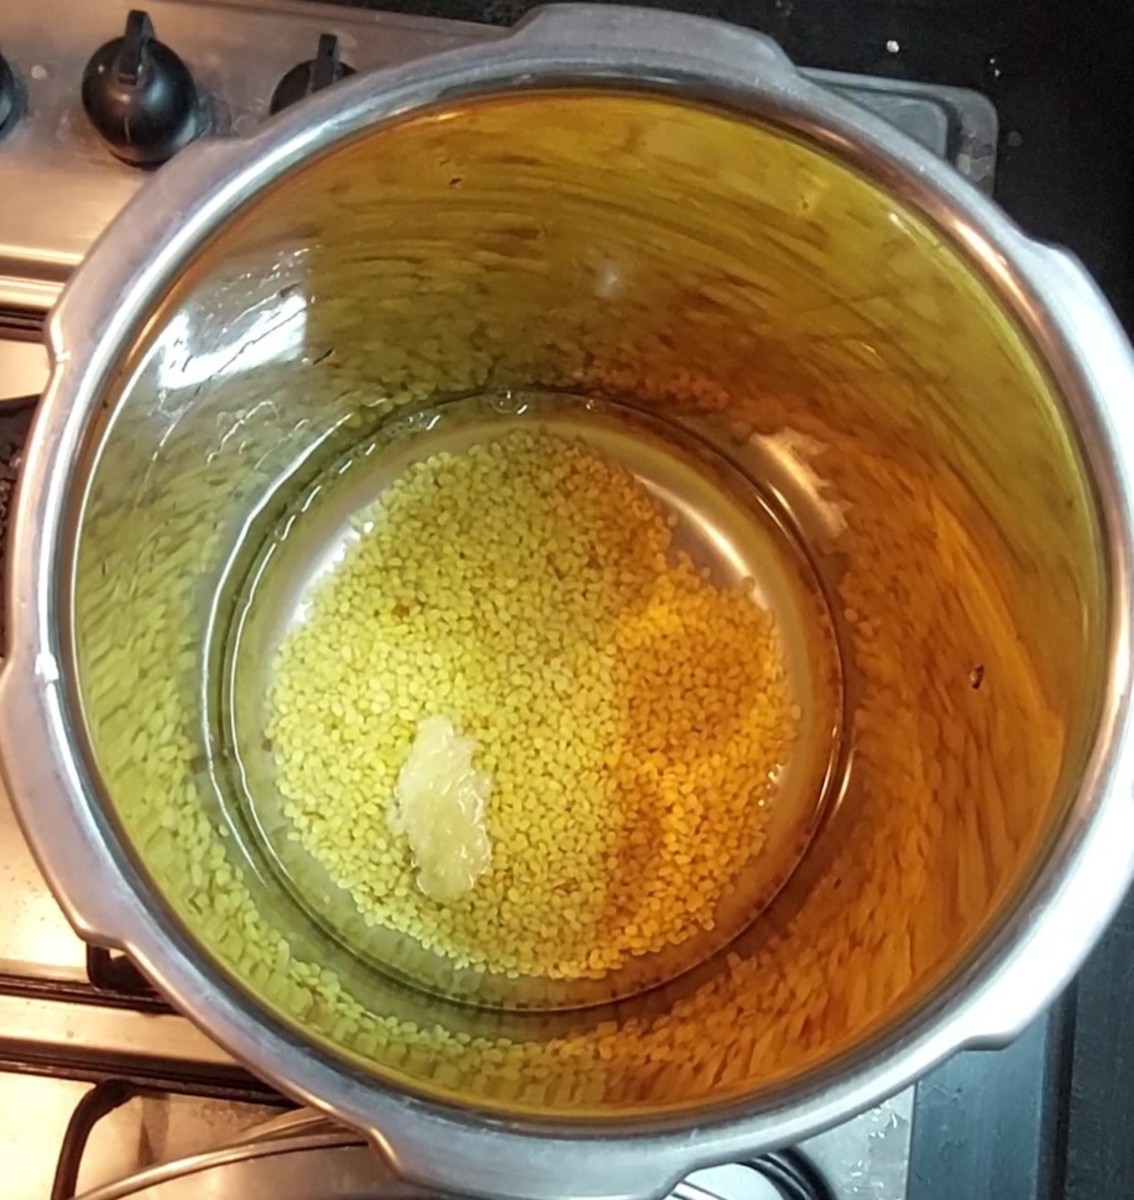 Rinse the dal well. Add 1 cup of water and 1/2 teaspoon ghee, close the lid of the cooker and take 3 whistles. Switch off the flame and let the pressure of the cooker settle on its own.